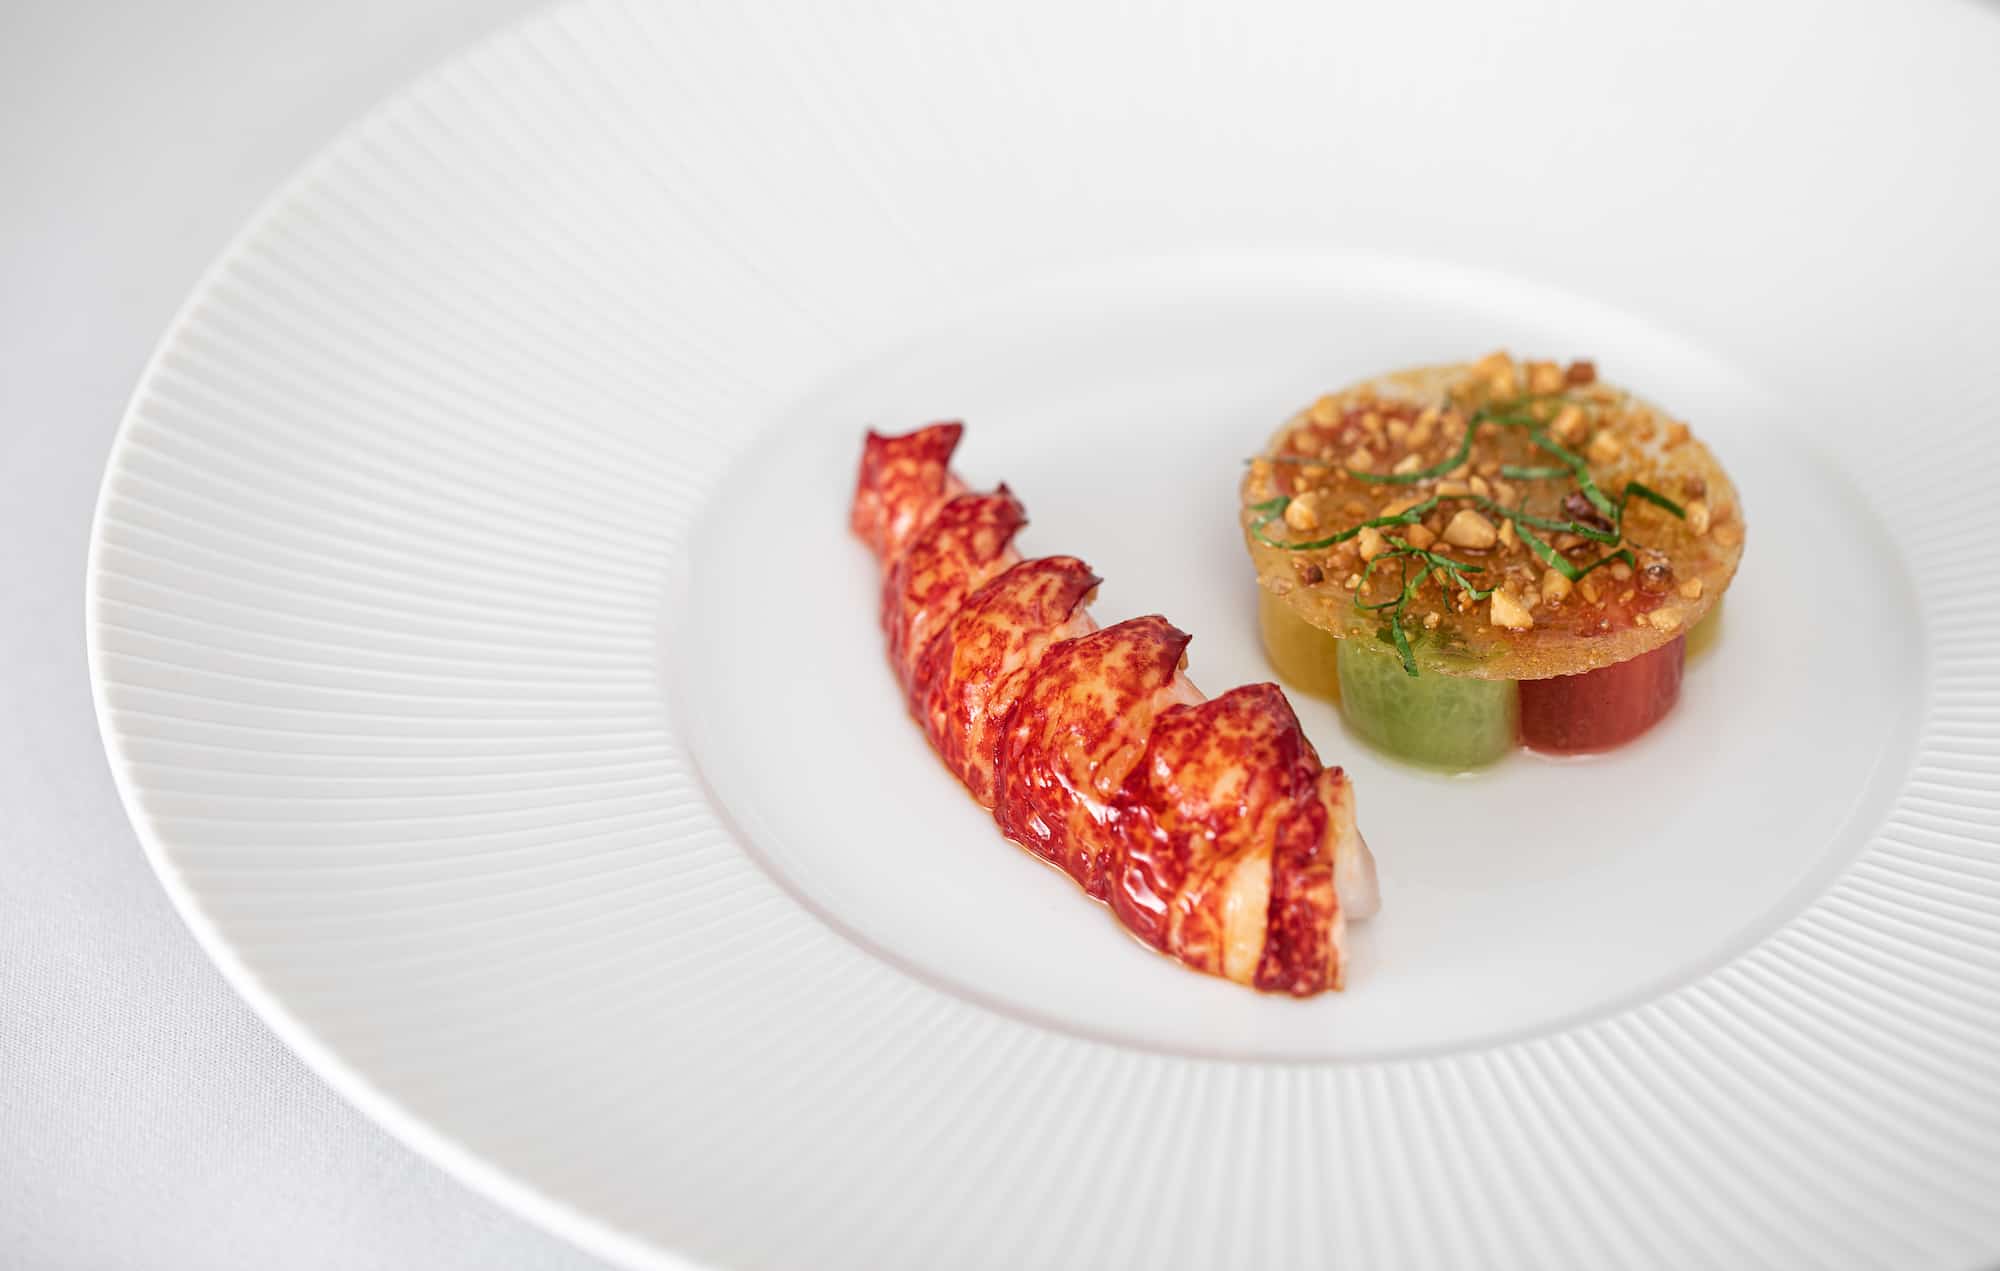 Ormer Mayfair by Sofian Poached lobster